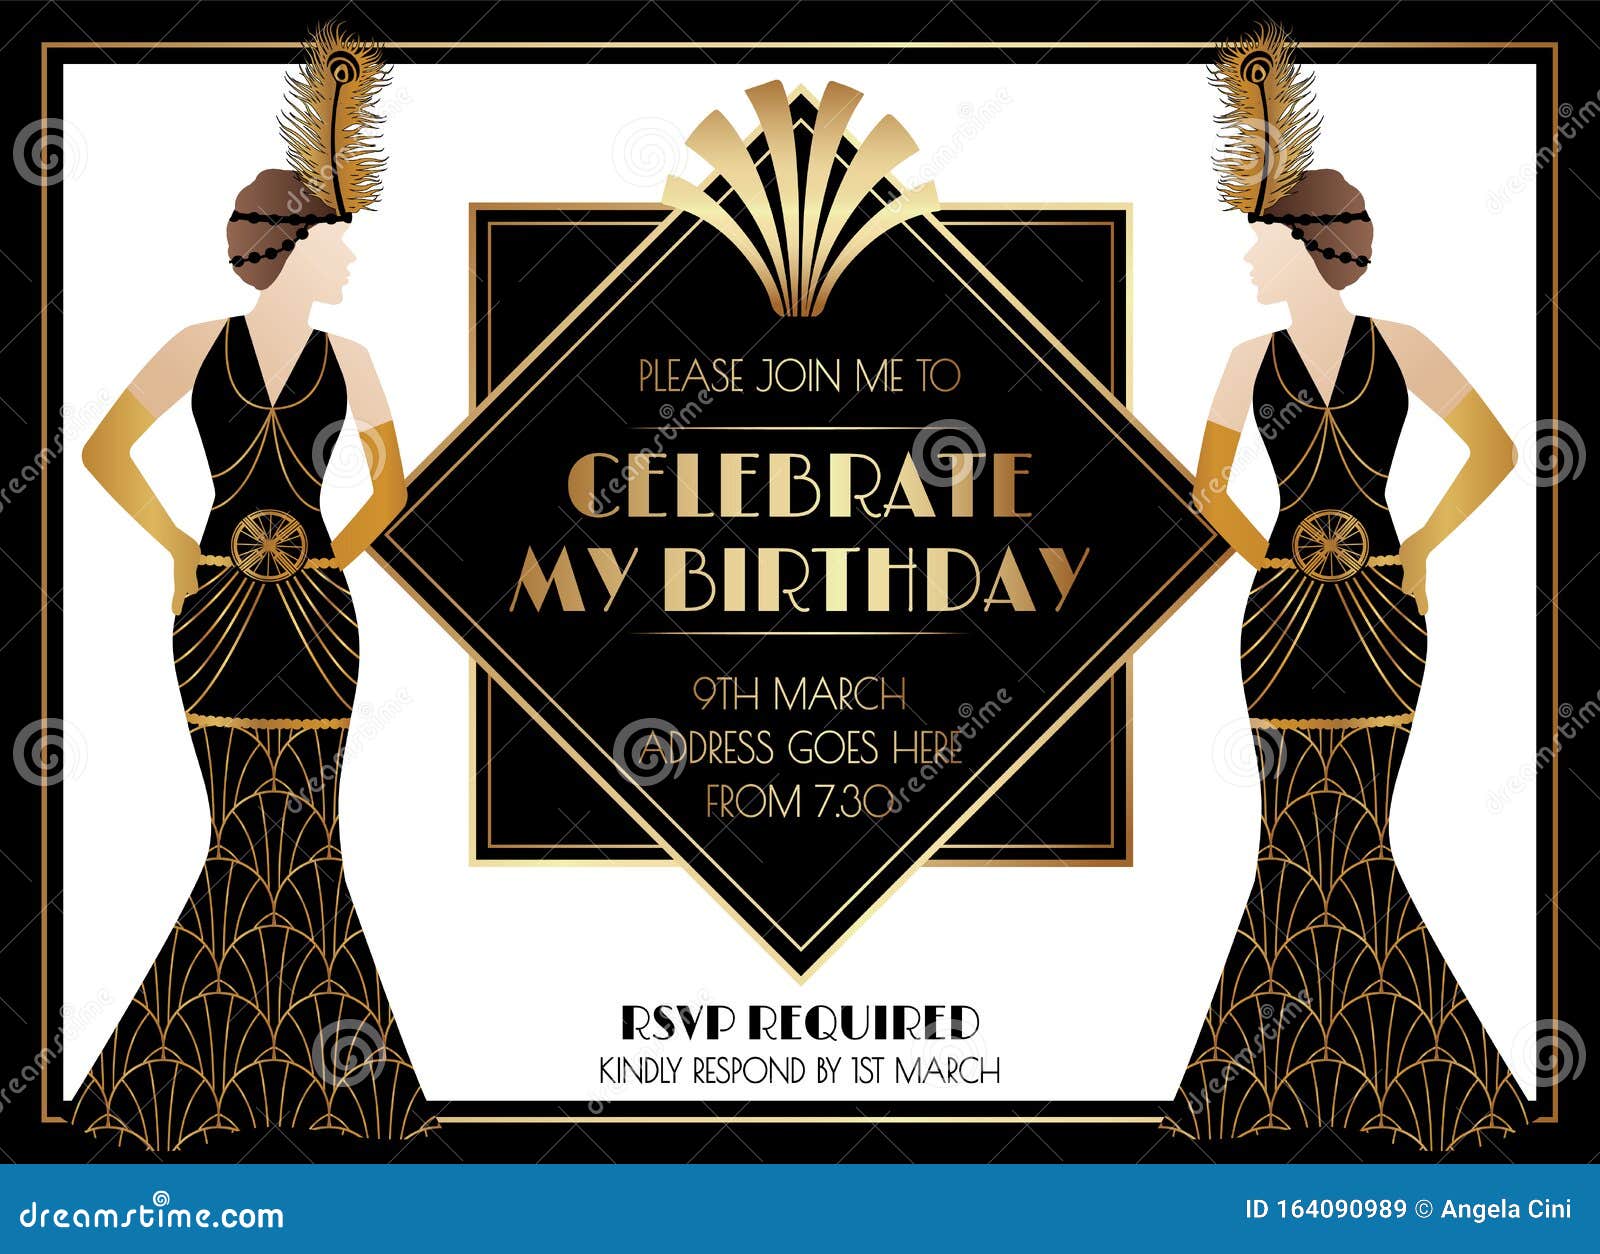 MS Word Format Black and Gold DOWNLOAD Instantly EDITABLE Text Flapper Girl Art Deco Birthday Party Invitation Ticket Style